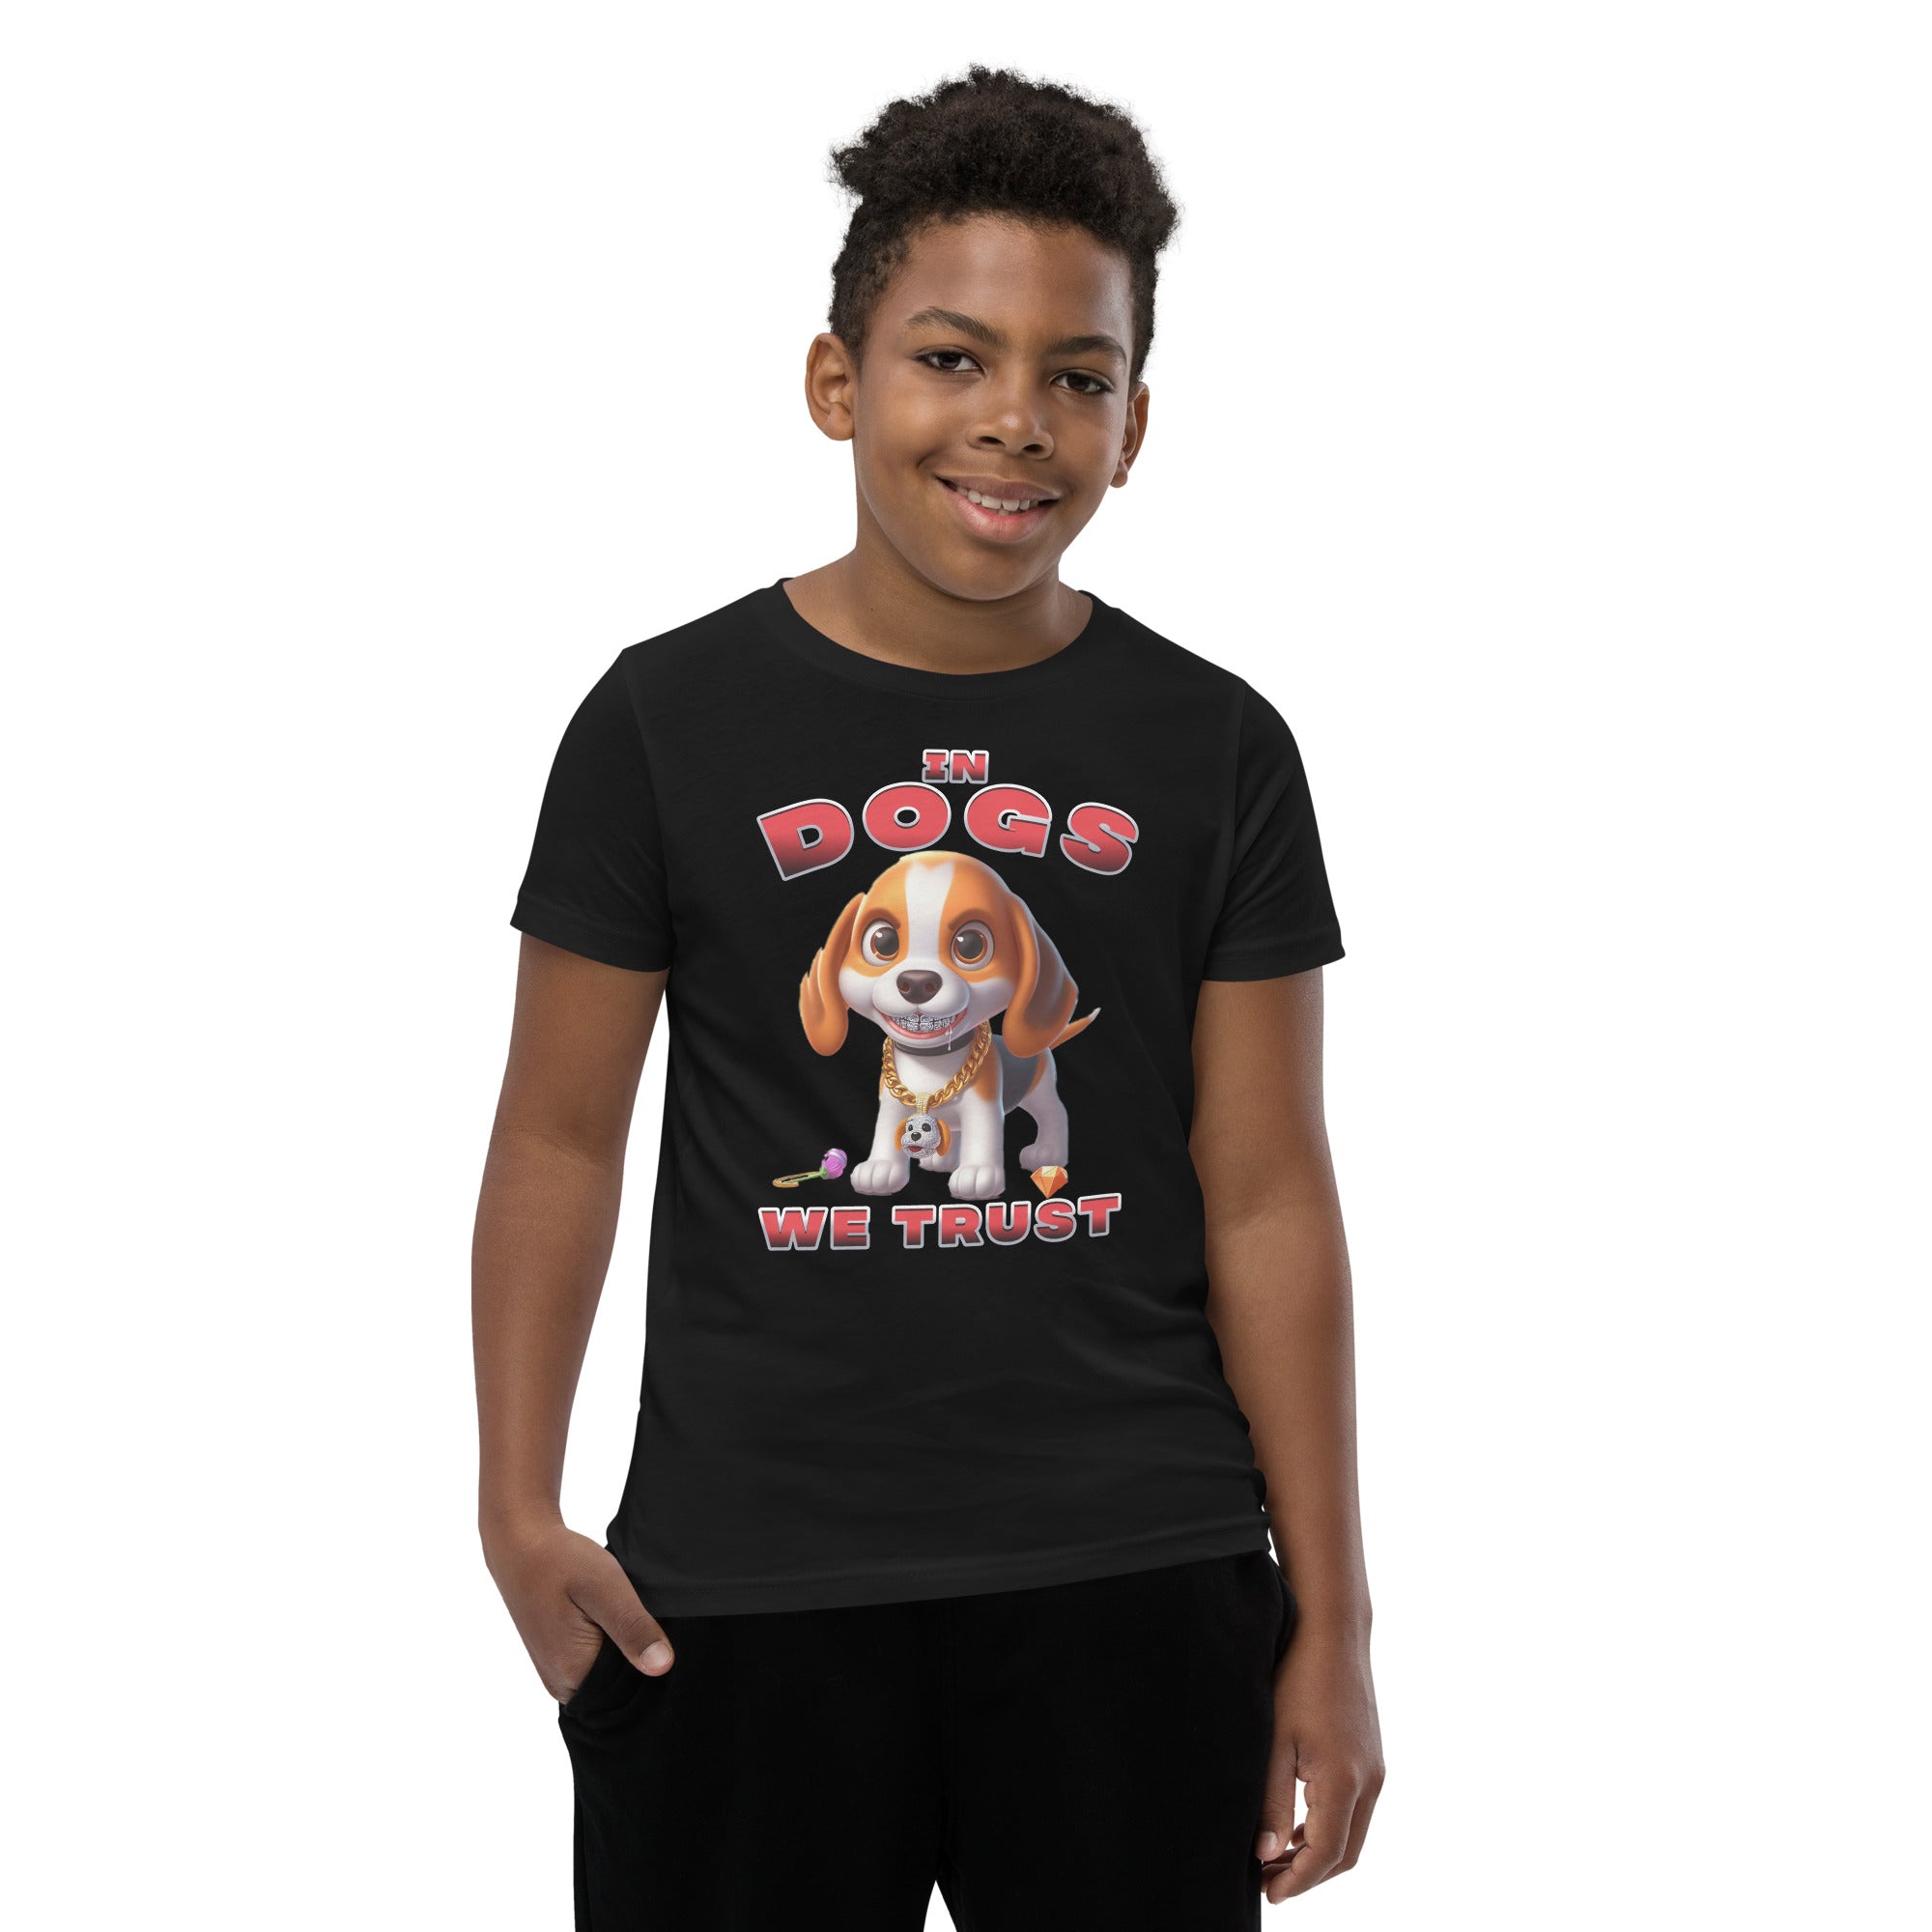 "In Dogs We Trust" T-shirt - Beagle - Kids